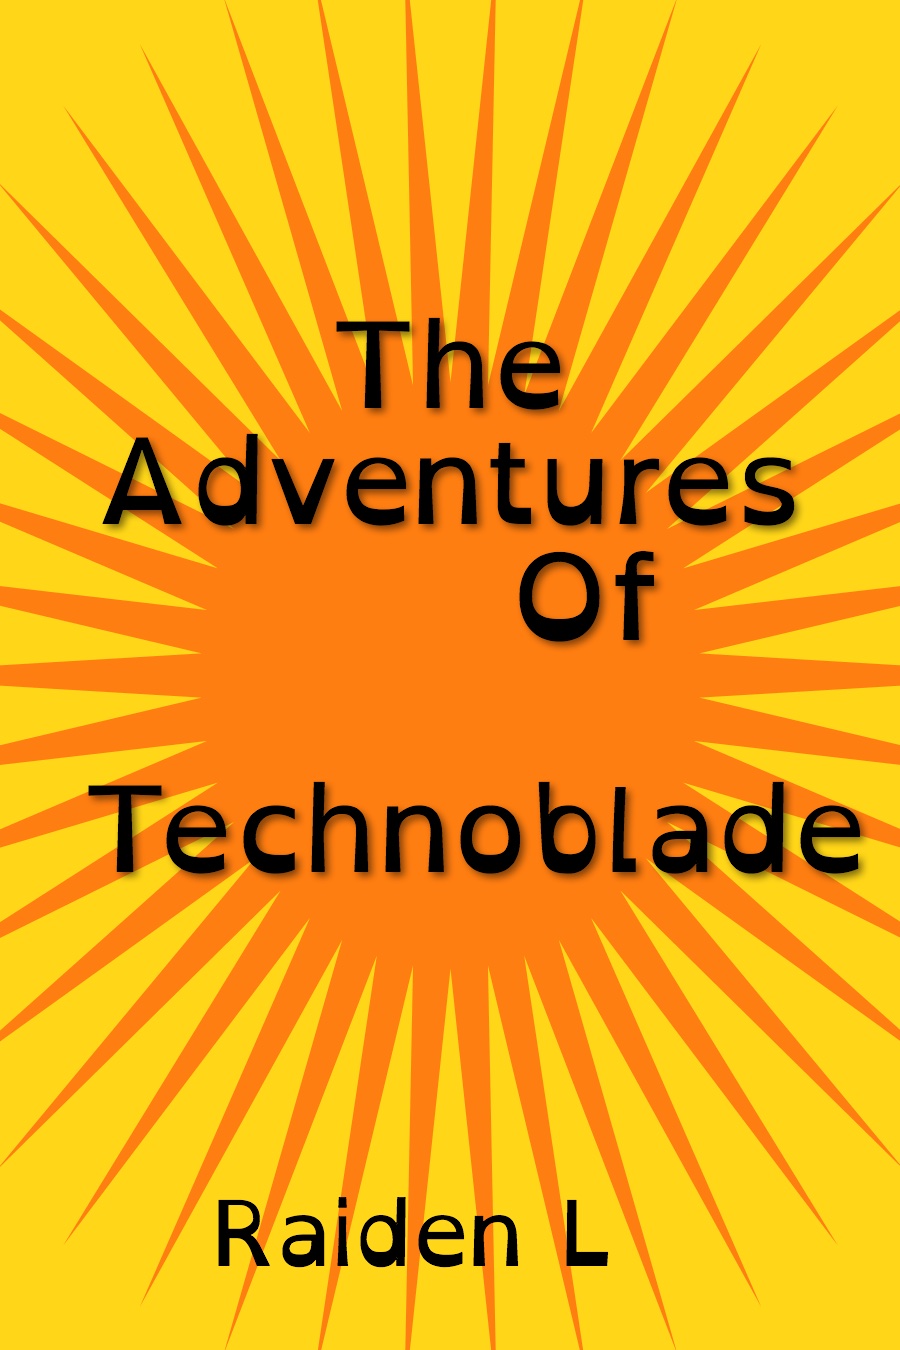 Adventures of Technoblade by Raiden L